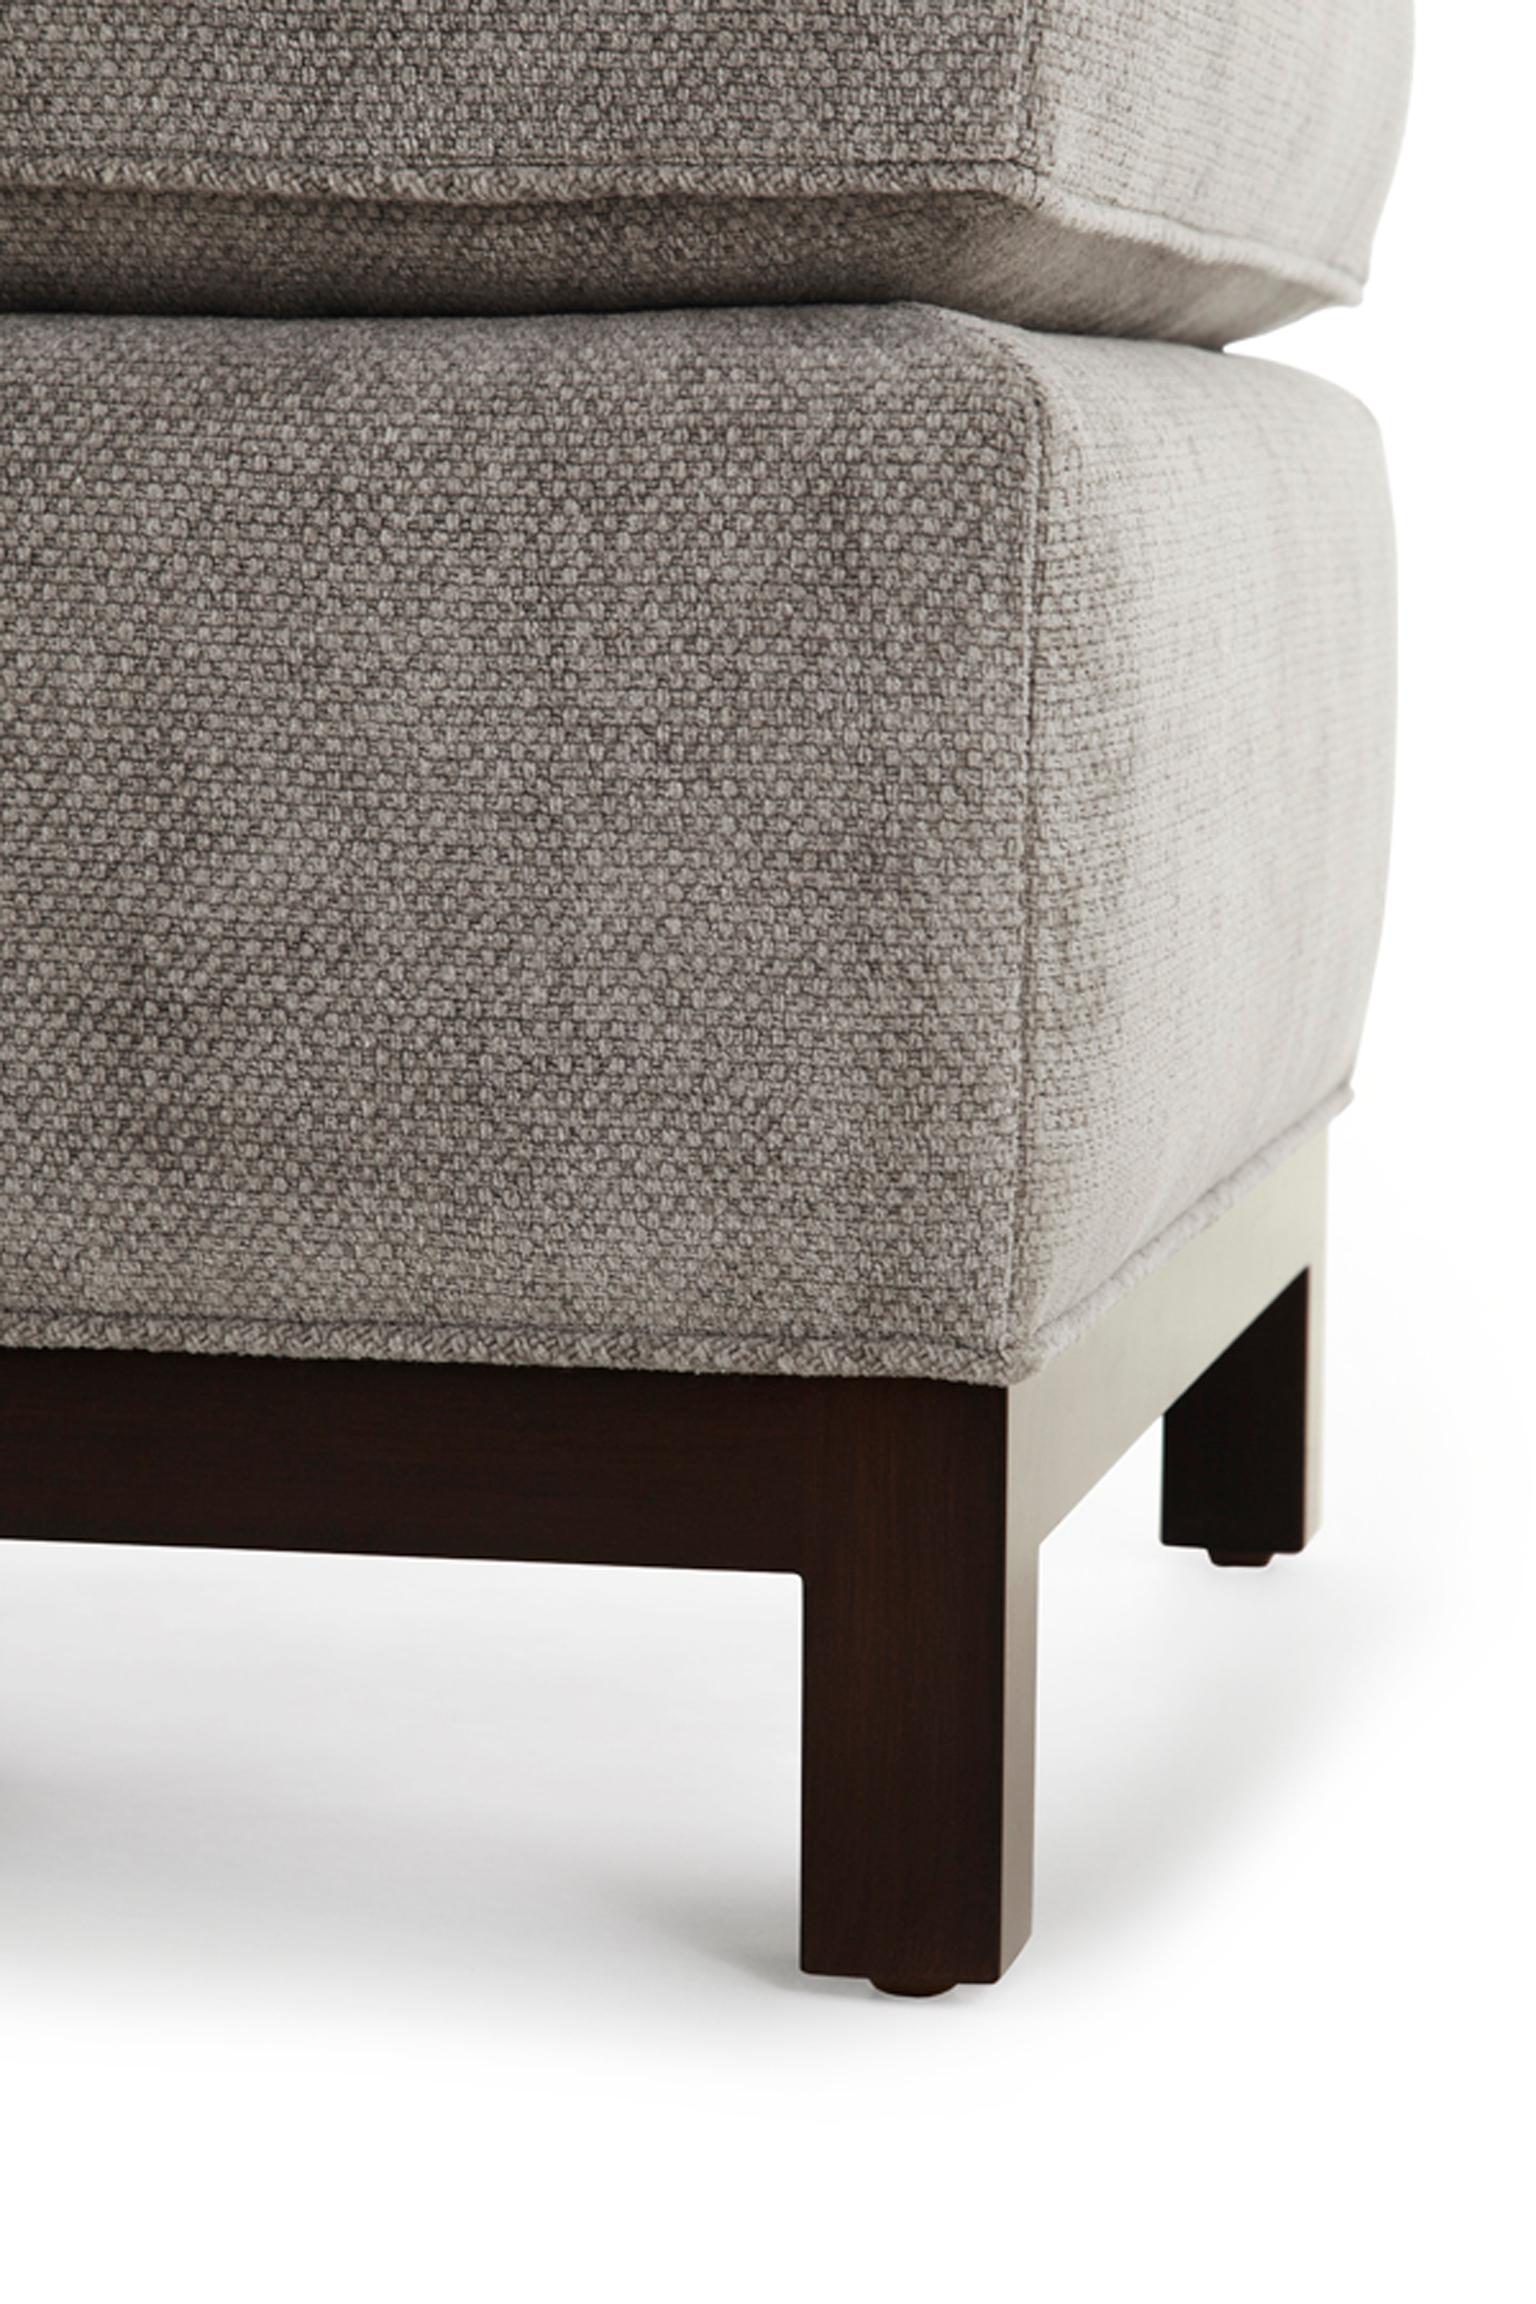 The simple Carson ottoman strikes a perfect balance of modern clean lines and traditional details. It features a slight pull, piped details, semi-attached seat cushion, spring edge, and an exposed wood base.